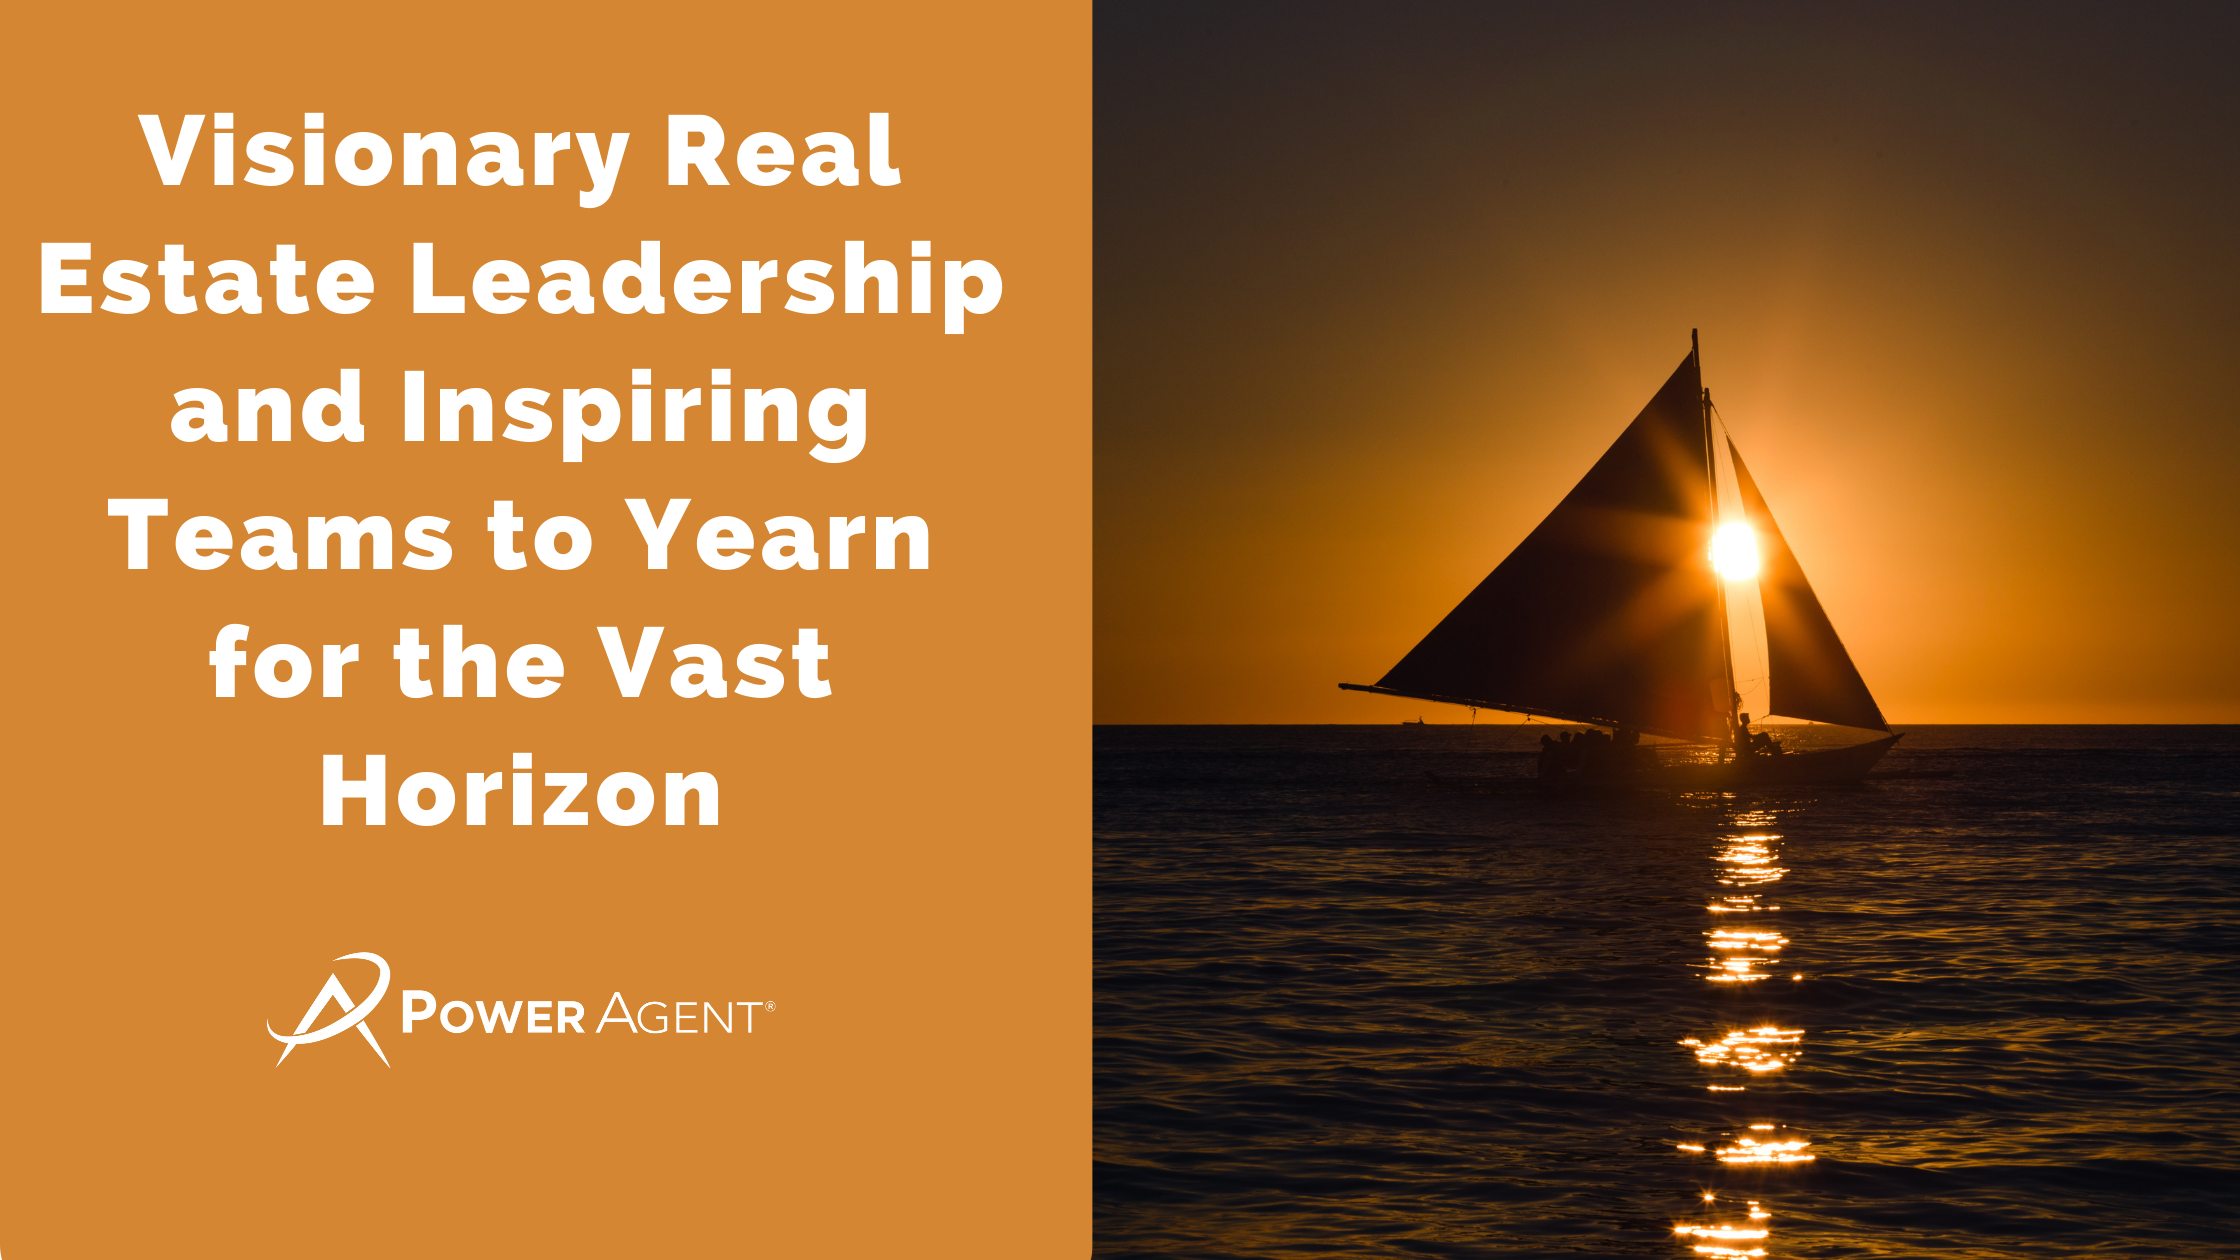 Visionary Real Estate Leadership and Inspiring Teams to Yearn for the Vast Horizon